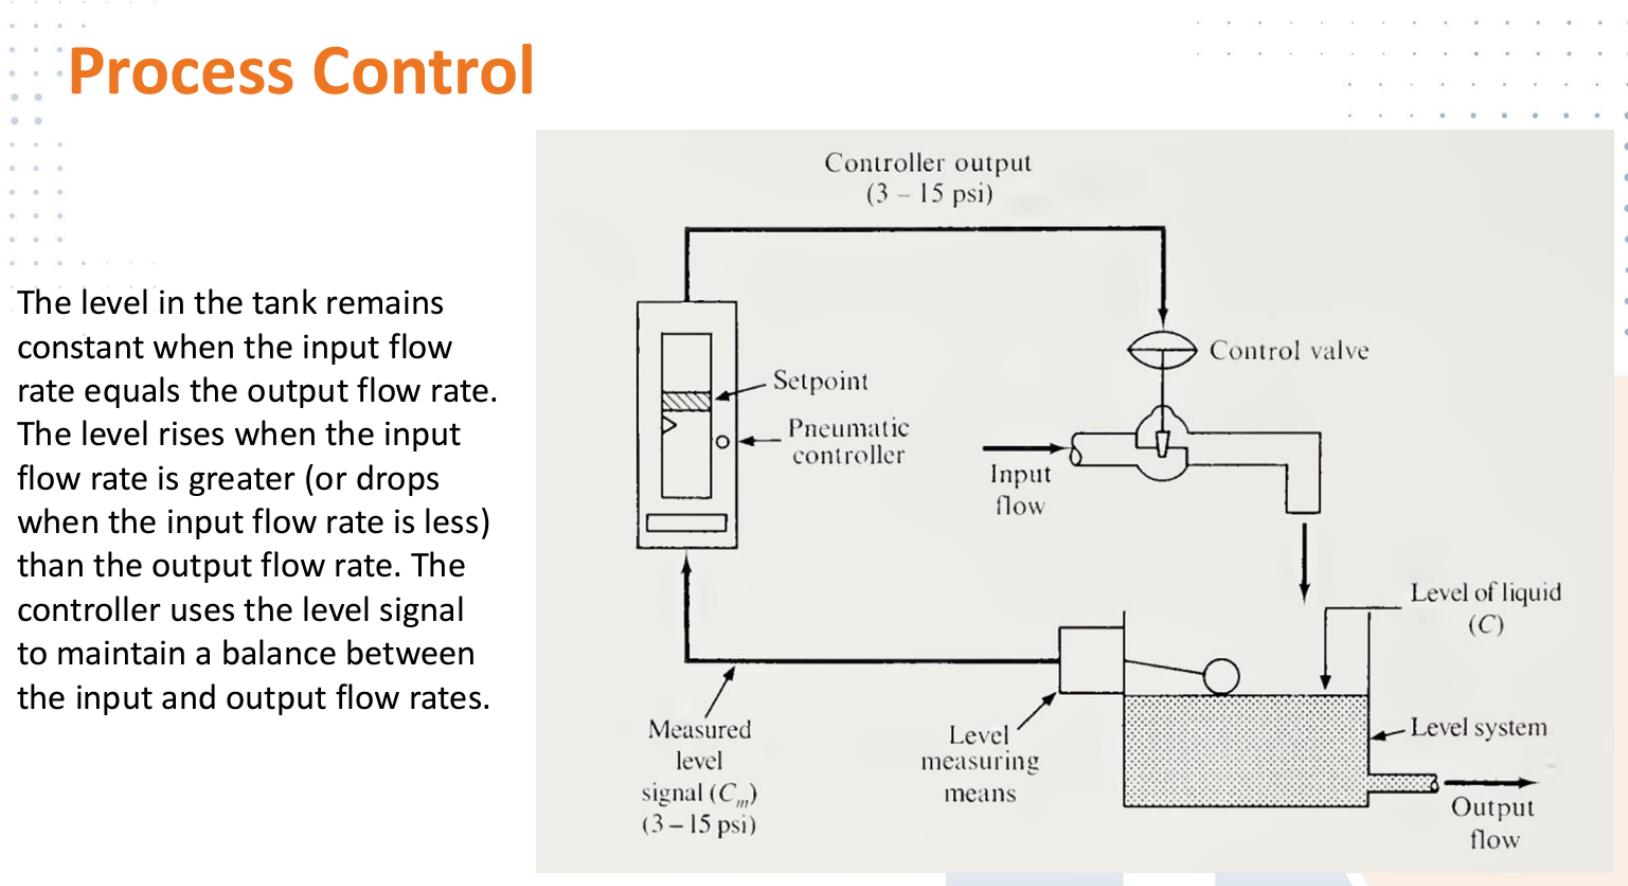 Process Control The level in the tank remains constant when the input flow rate equals the output flow rate.